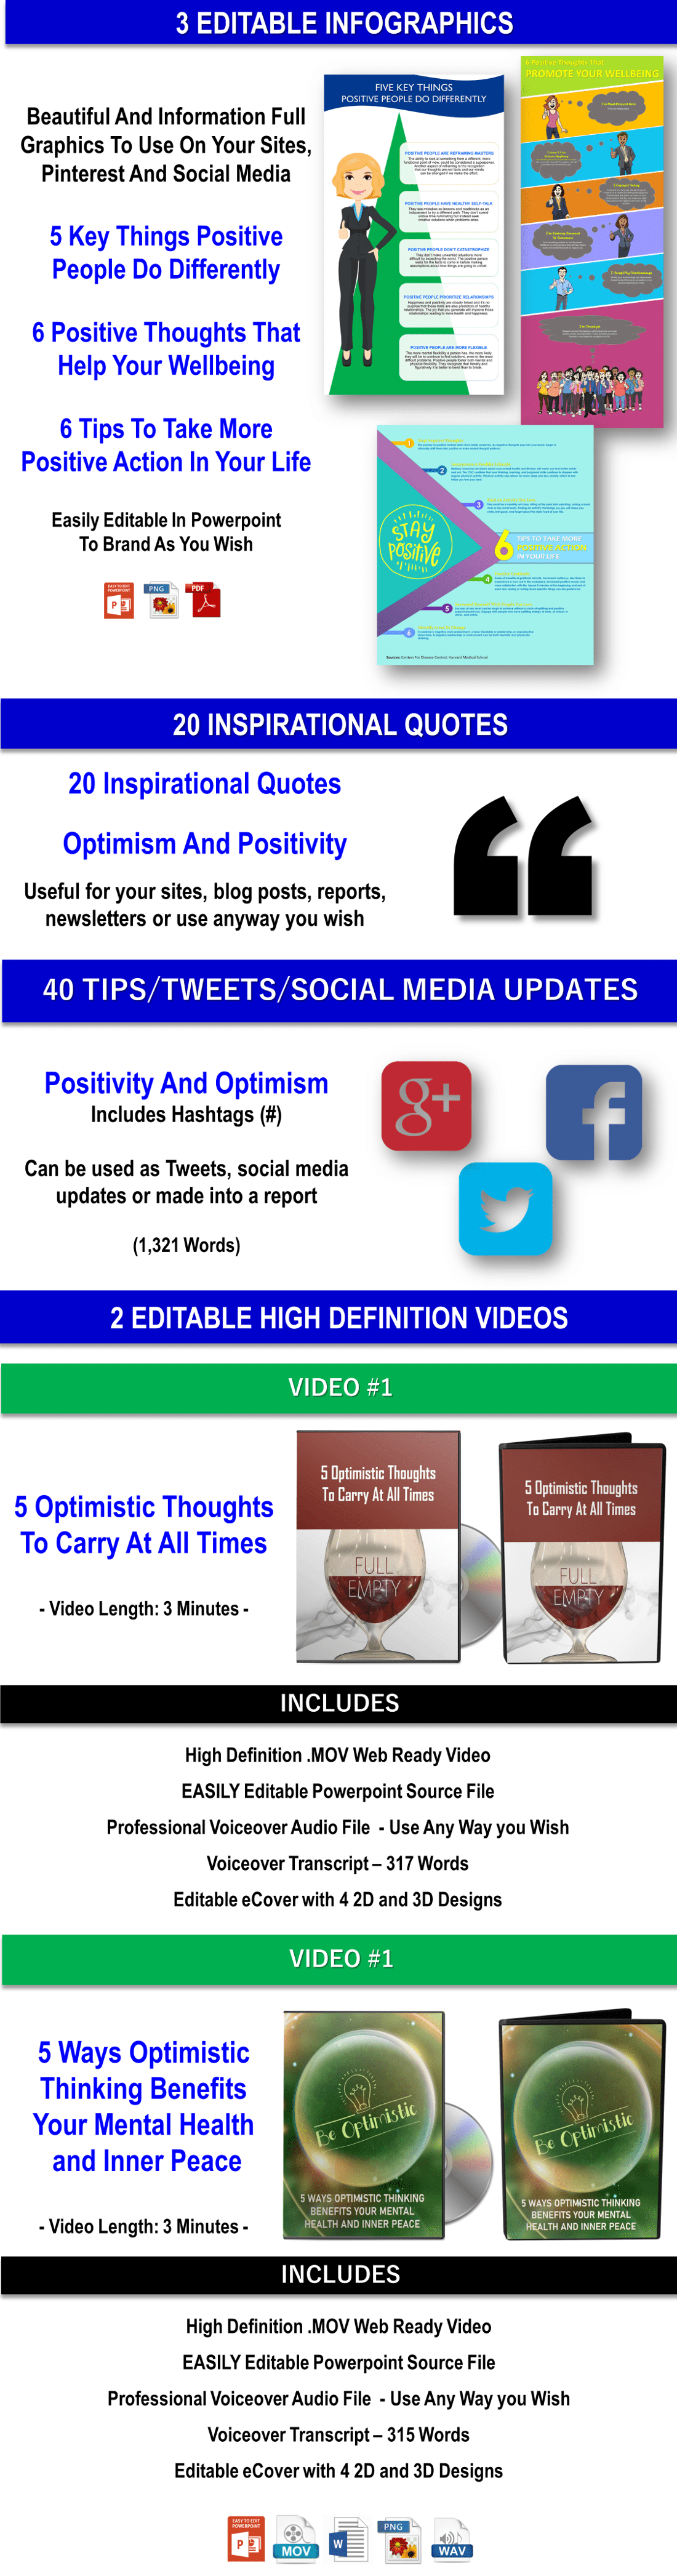 Boost Optimism And Positivity Content With PLR Rights